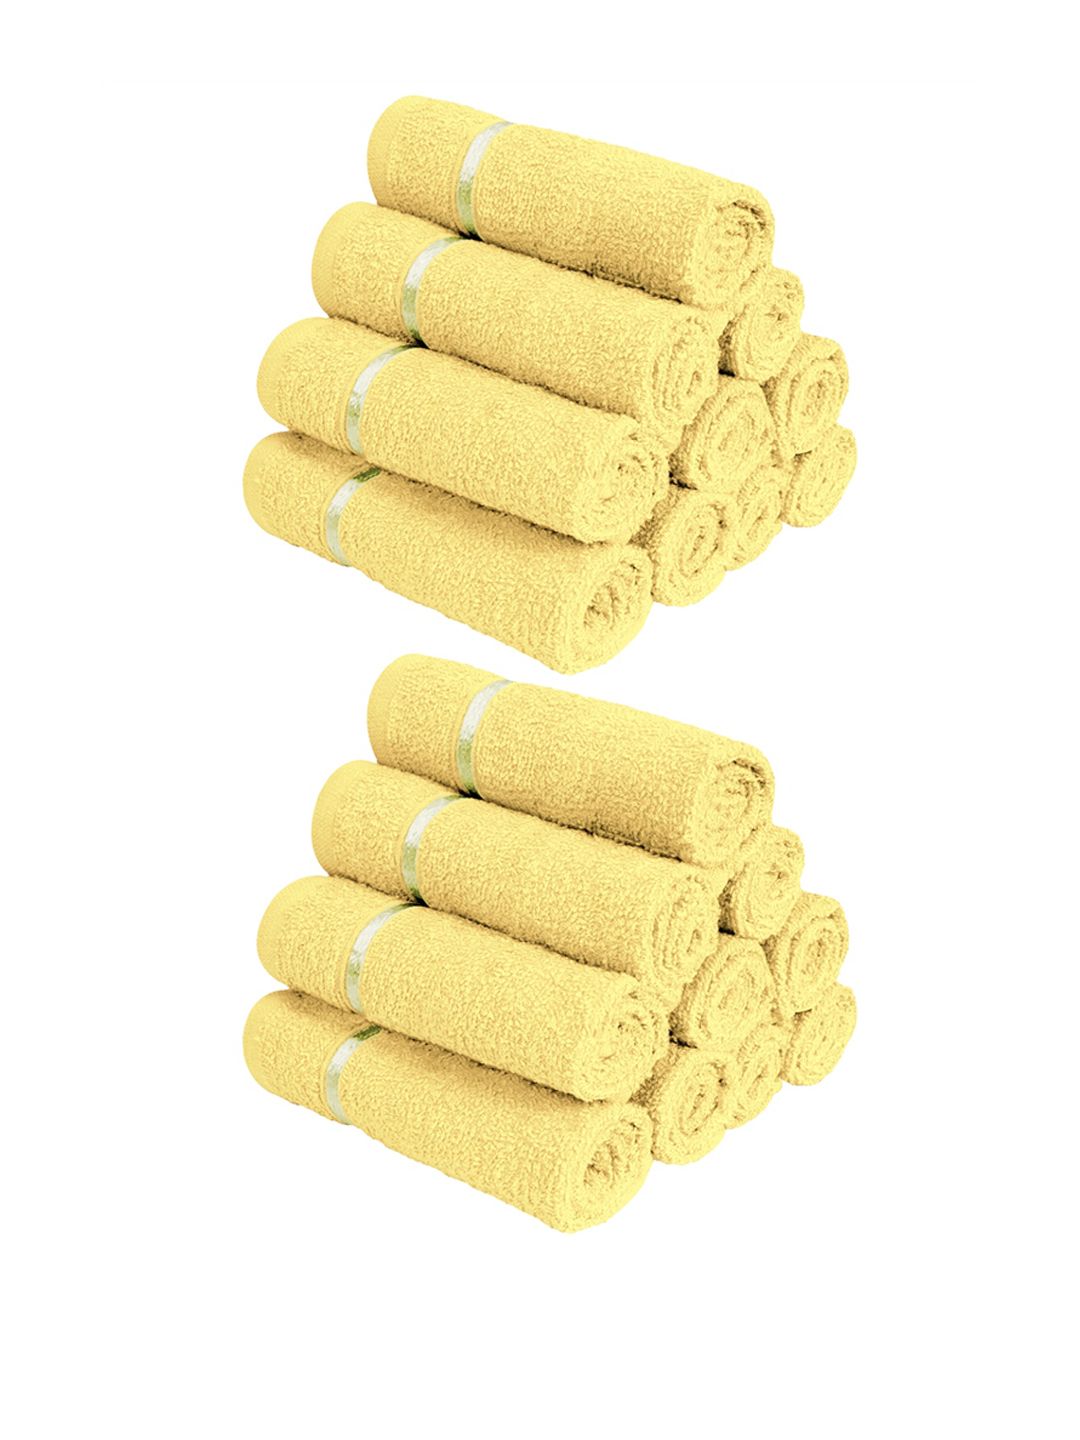 Story@home Set Of 20 Yellow Solid 450 GSM Pure Cotton Face Towels Price in India